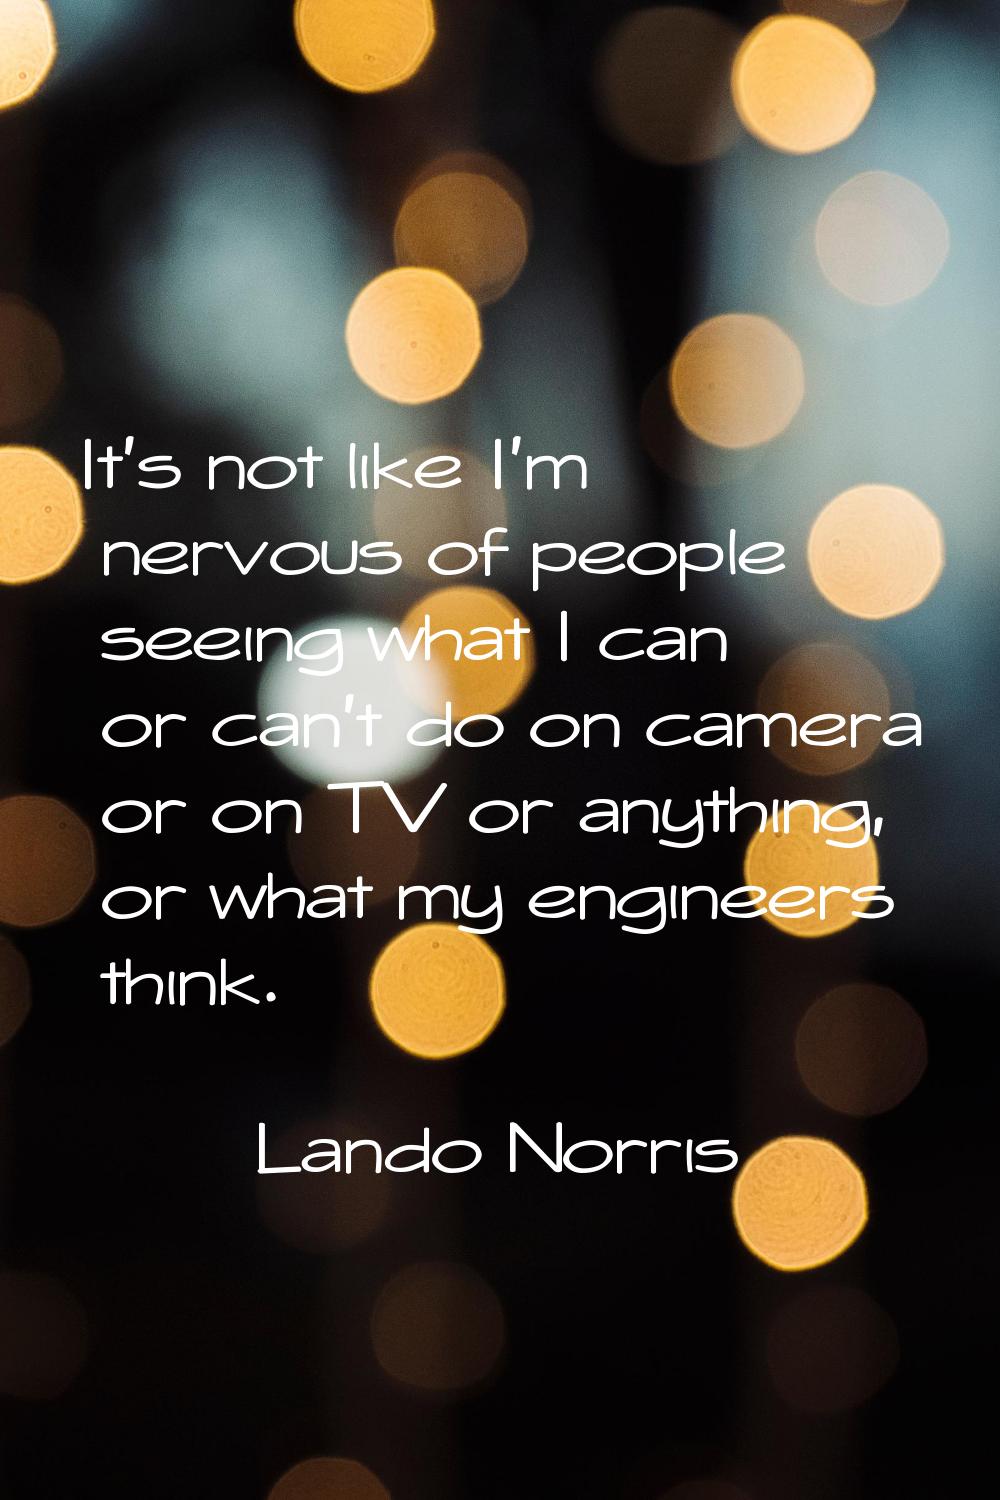 It's not like I'm nervous of people seeing what I can or can't do on camera or on TV or anything, o